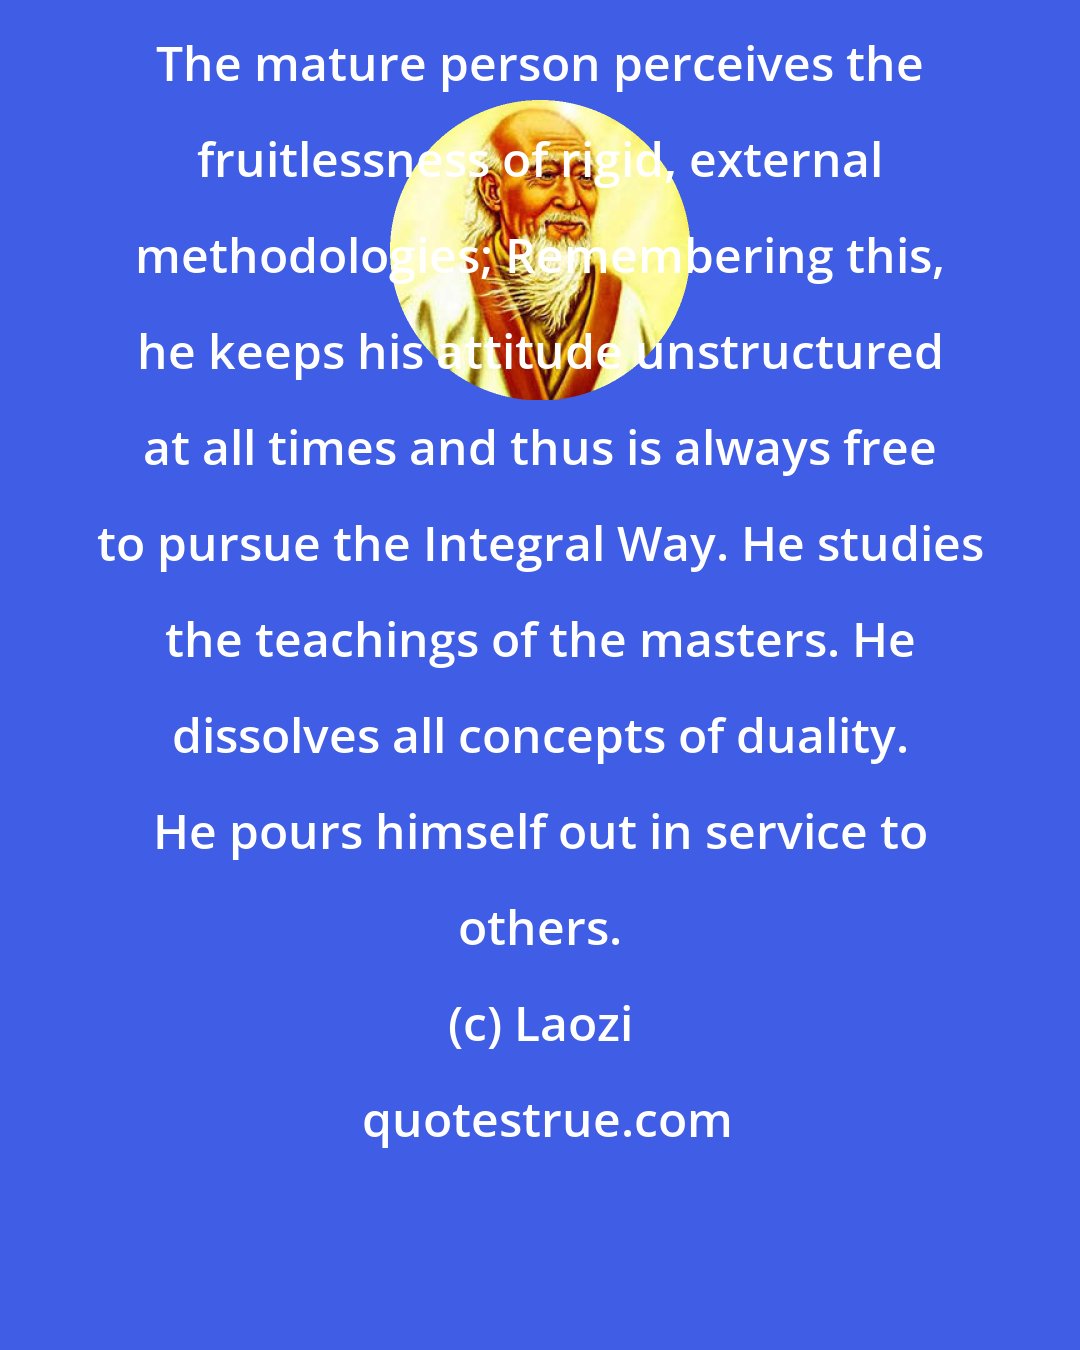 Laozi: The mature person perceives the fruitlessness of rigid, external methodologies; Remembering this, he keeps his attitude unstructured at all times and thus is always free to pursue the Integral Way. He studies the teachings of the masters. He dissolves all concepts of duality. He pours himself out in service to others.